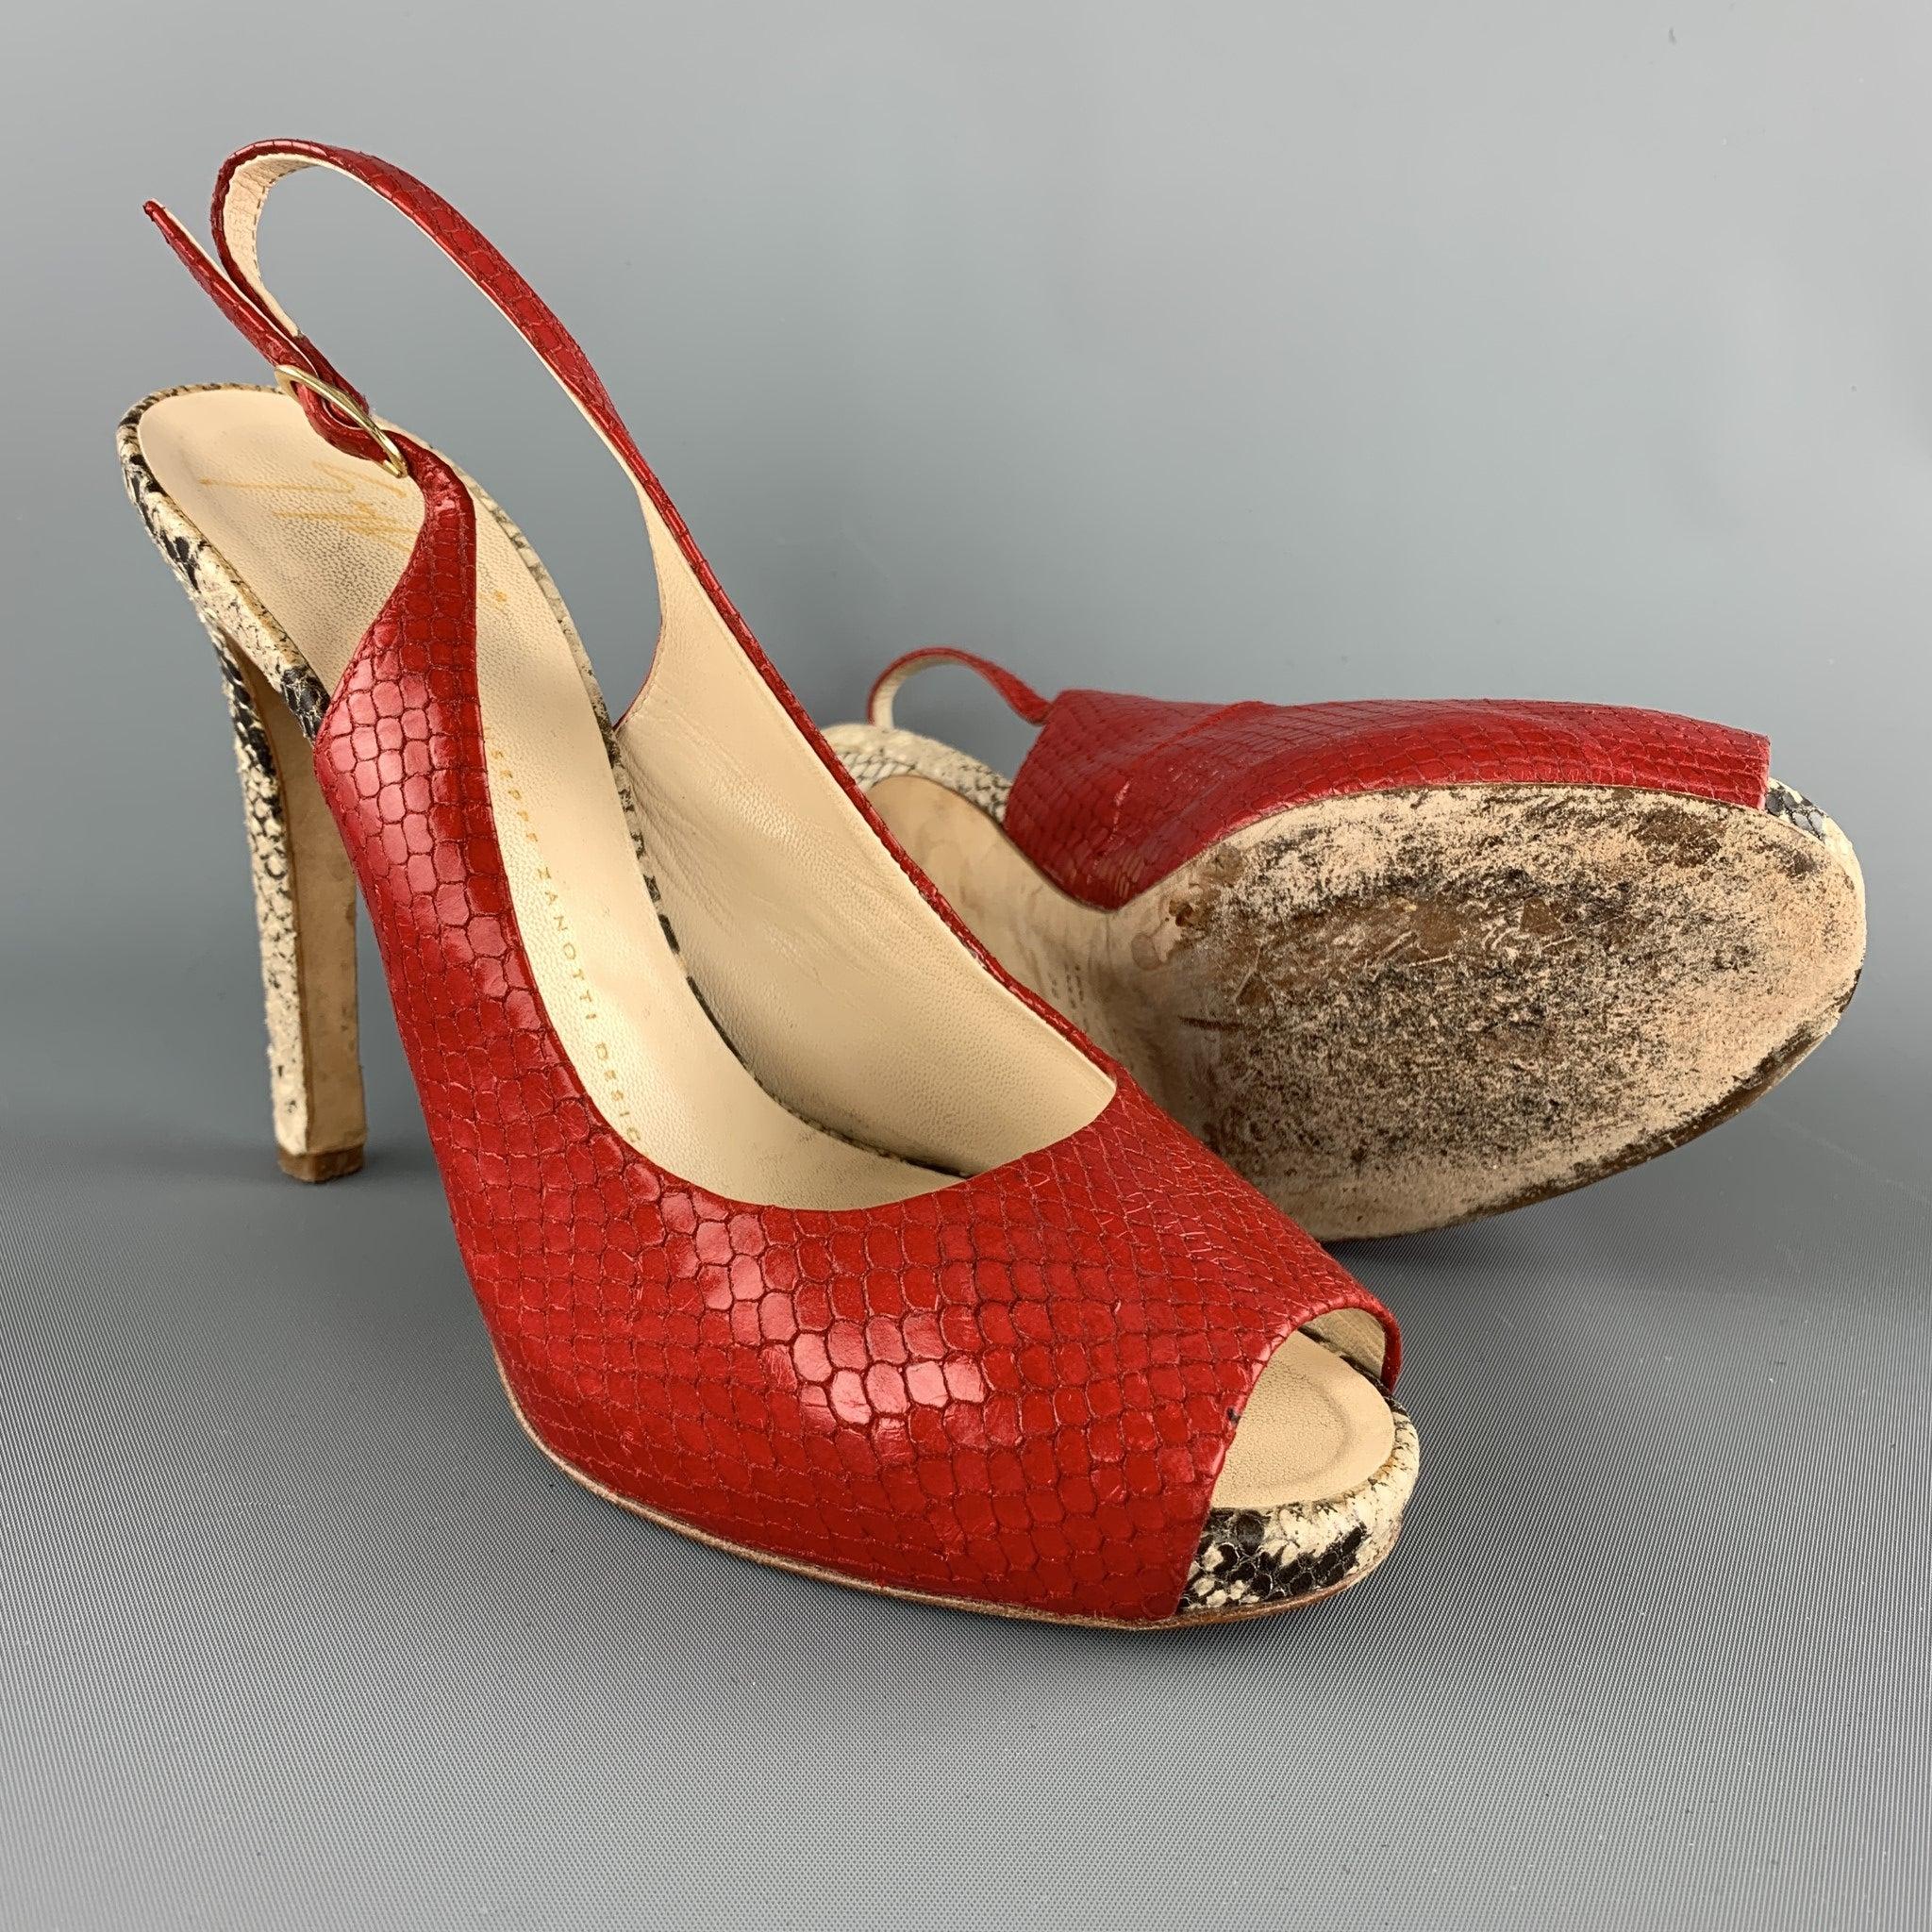 GIUSEPPE ZANOTTI Size 8 Red & Beige Snake Skin Slingback Peep Toe Pumps In Good Condition For Sale In San Francisco, CA